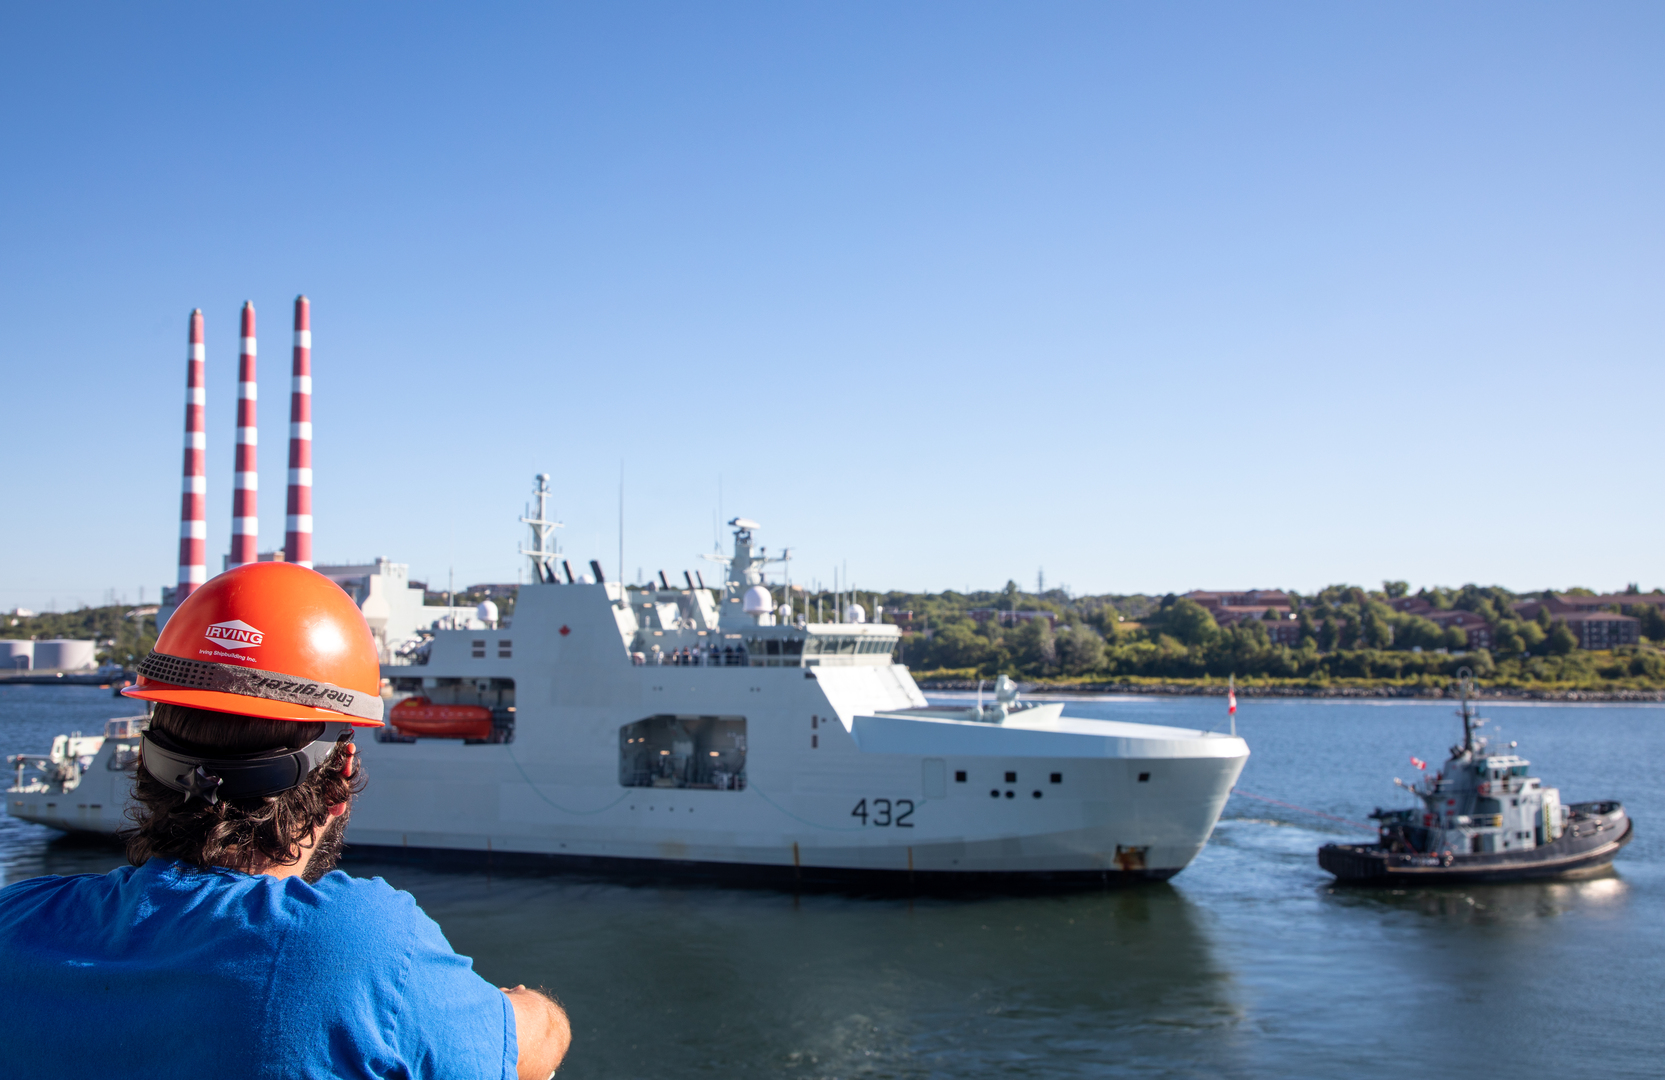 A shipyard worker looks out over Halifax Harbour as HMCS Max Bernays is guided by a tugboat. The Max Bernays is one of the navy's new Arctic patrol vessels being built at the Irving shipyard.